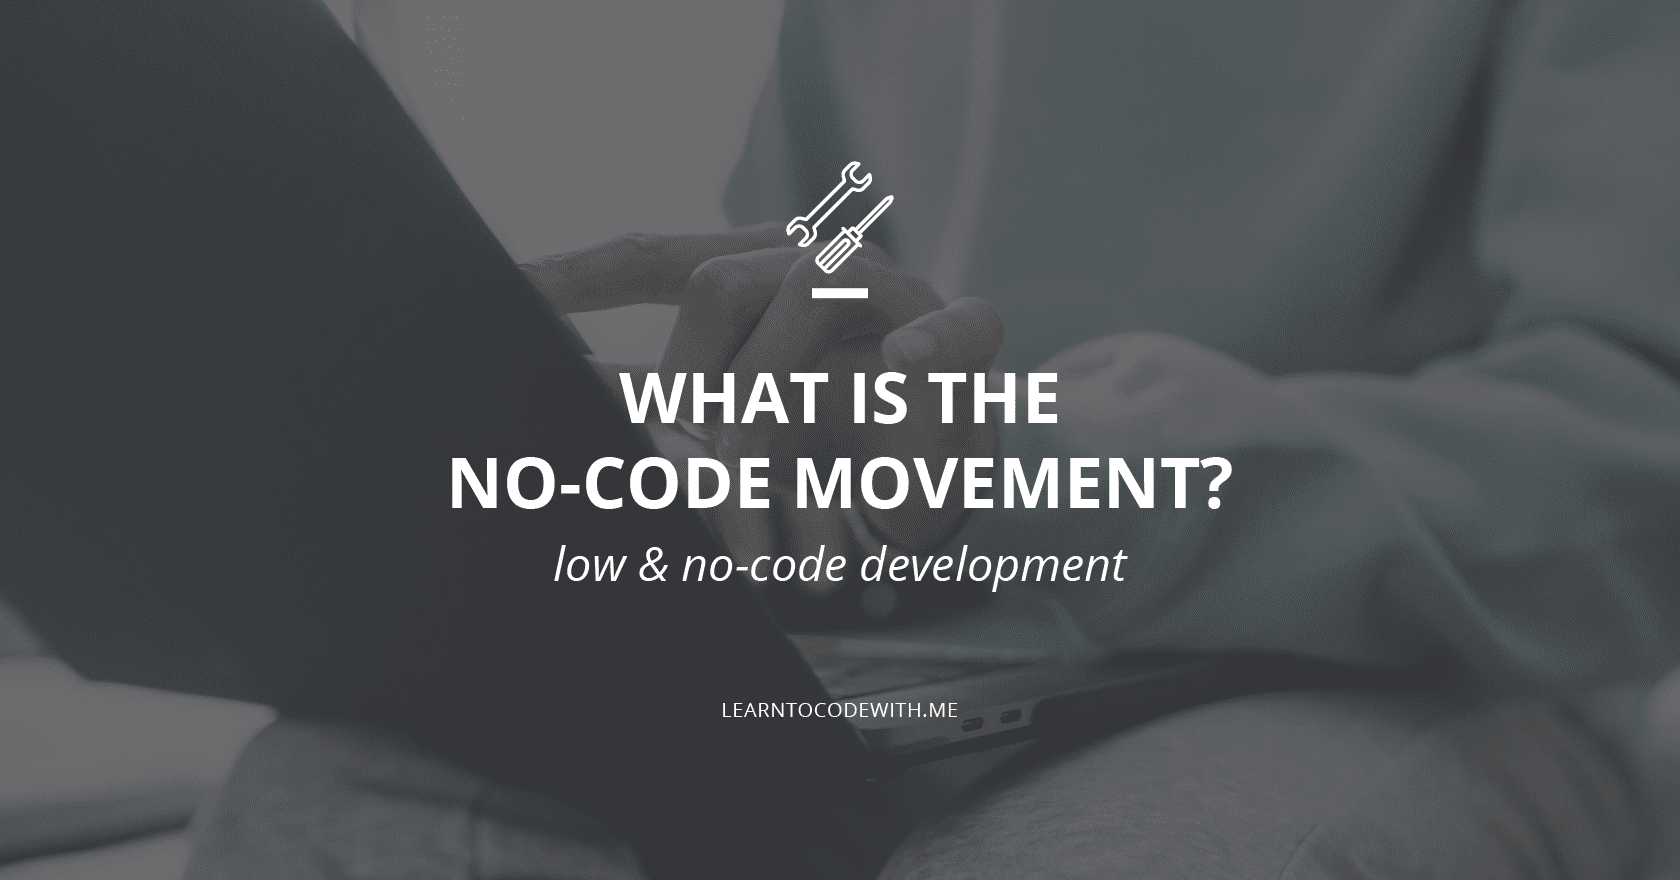 what is the no-code movement?